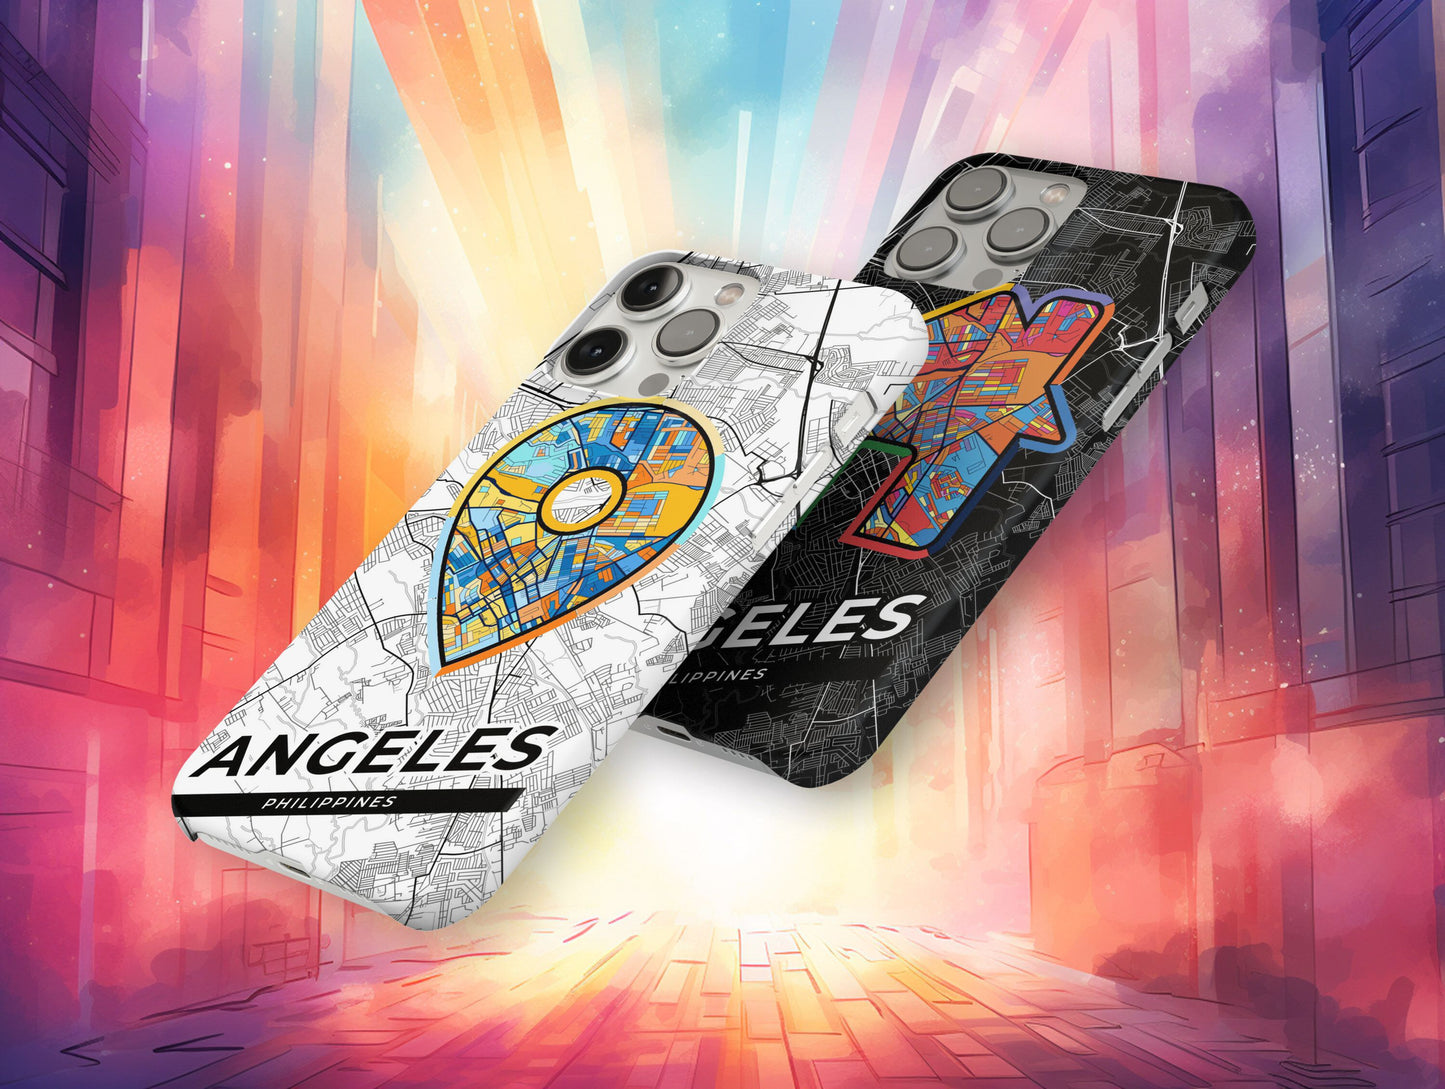 Angeles Philippines slim phone case with colorful icon. Birthday, wedding or housewarming gift. Couple match cases.